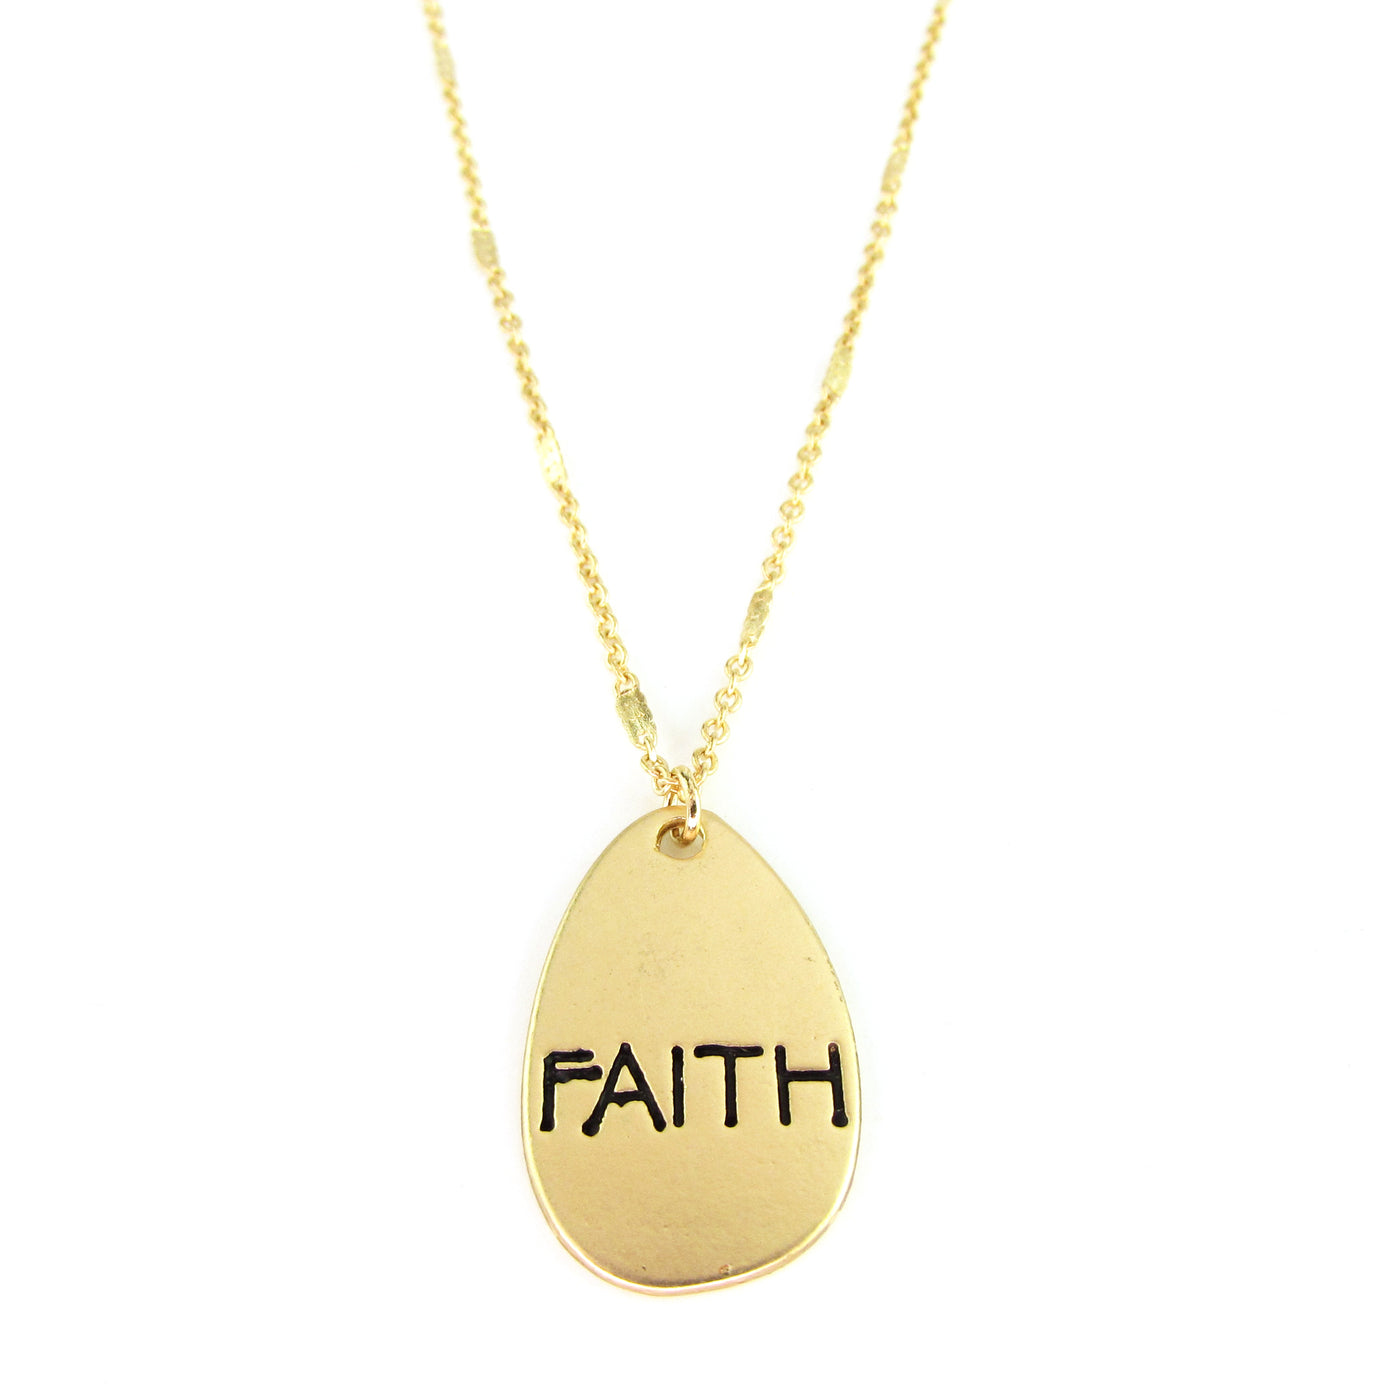 Trust Necklace-Good Work(s) Make A Difference® | Christian and Inspirational Jewelry Company in Vernon, California